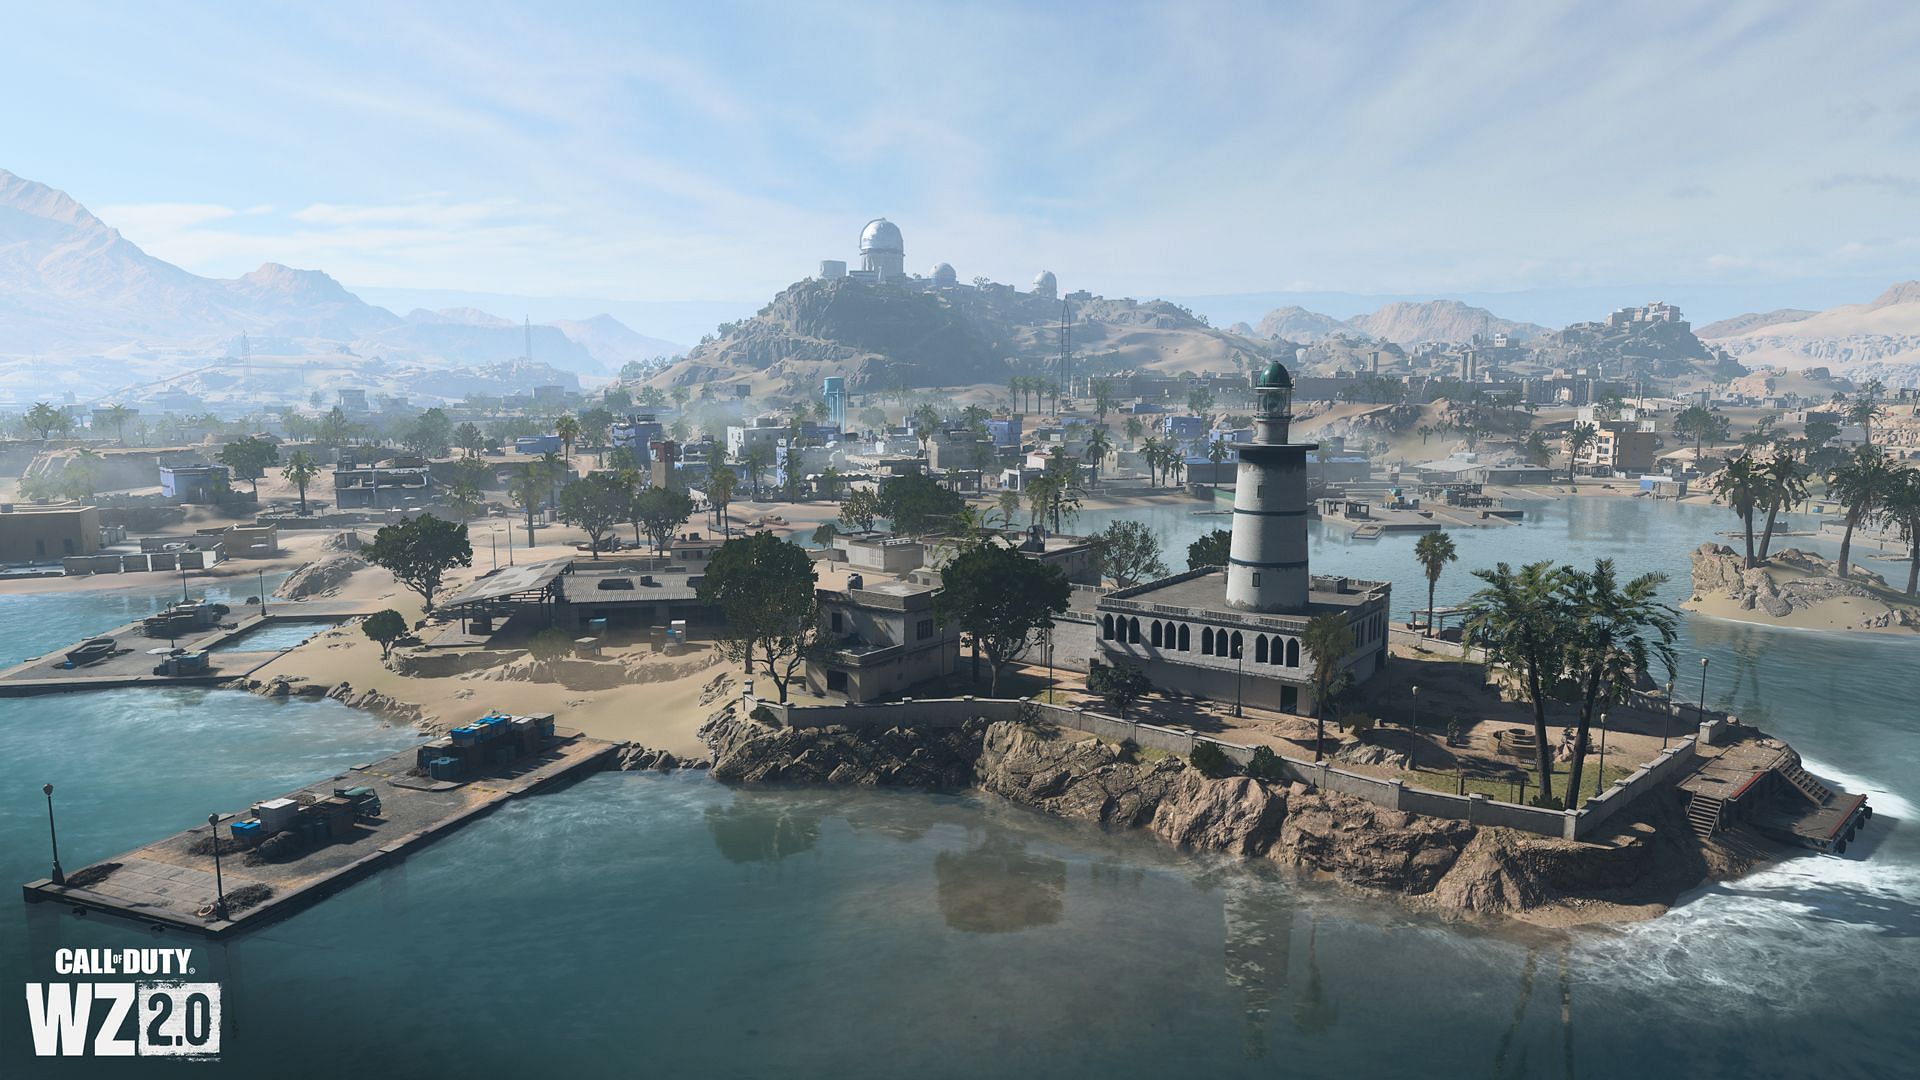 Call Of Duty: Warzone': dataminers uncover new Rebirth Island location